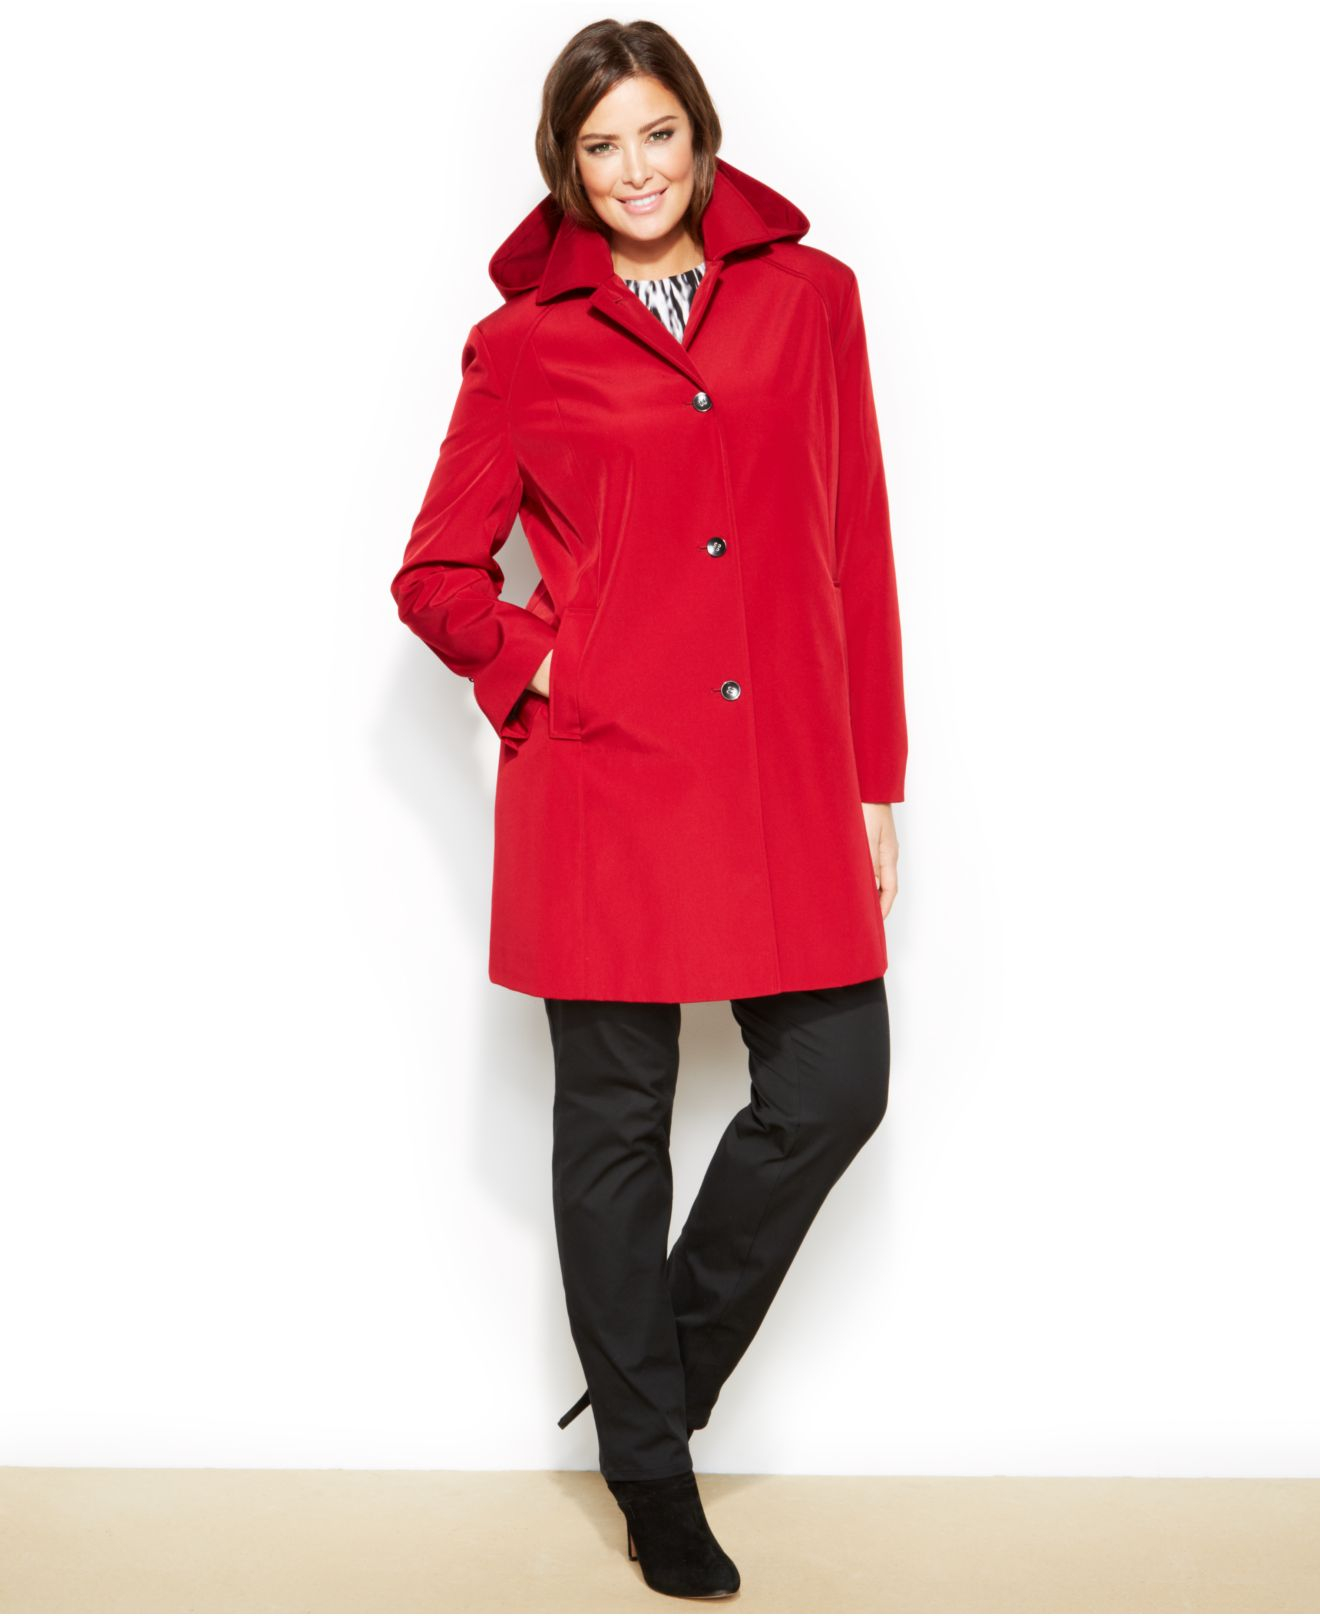 Lyst - Calvin Klein Plus Size Hooded Single-Breasted Raincoat in Red